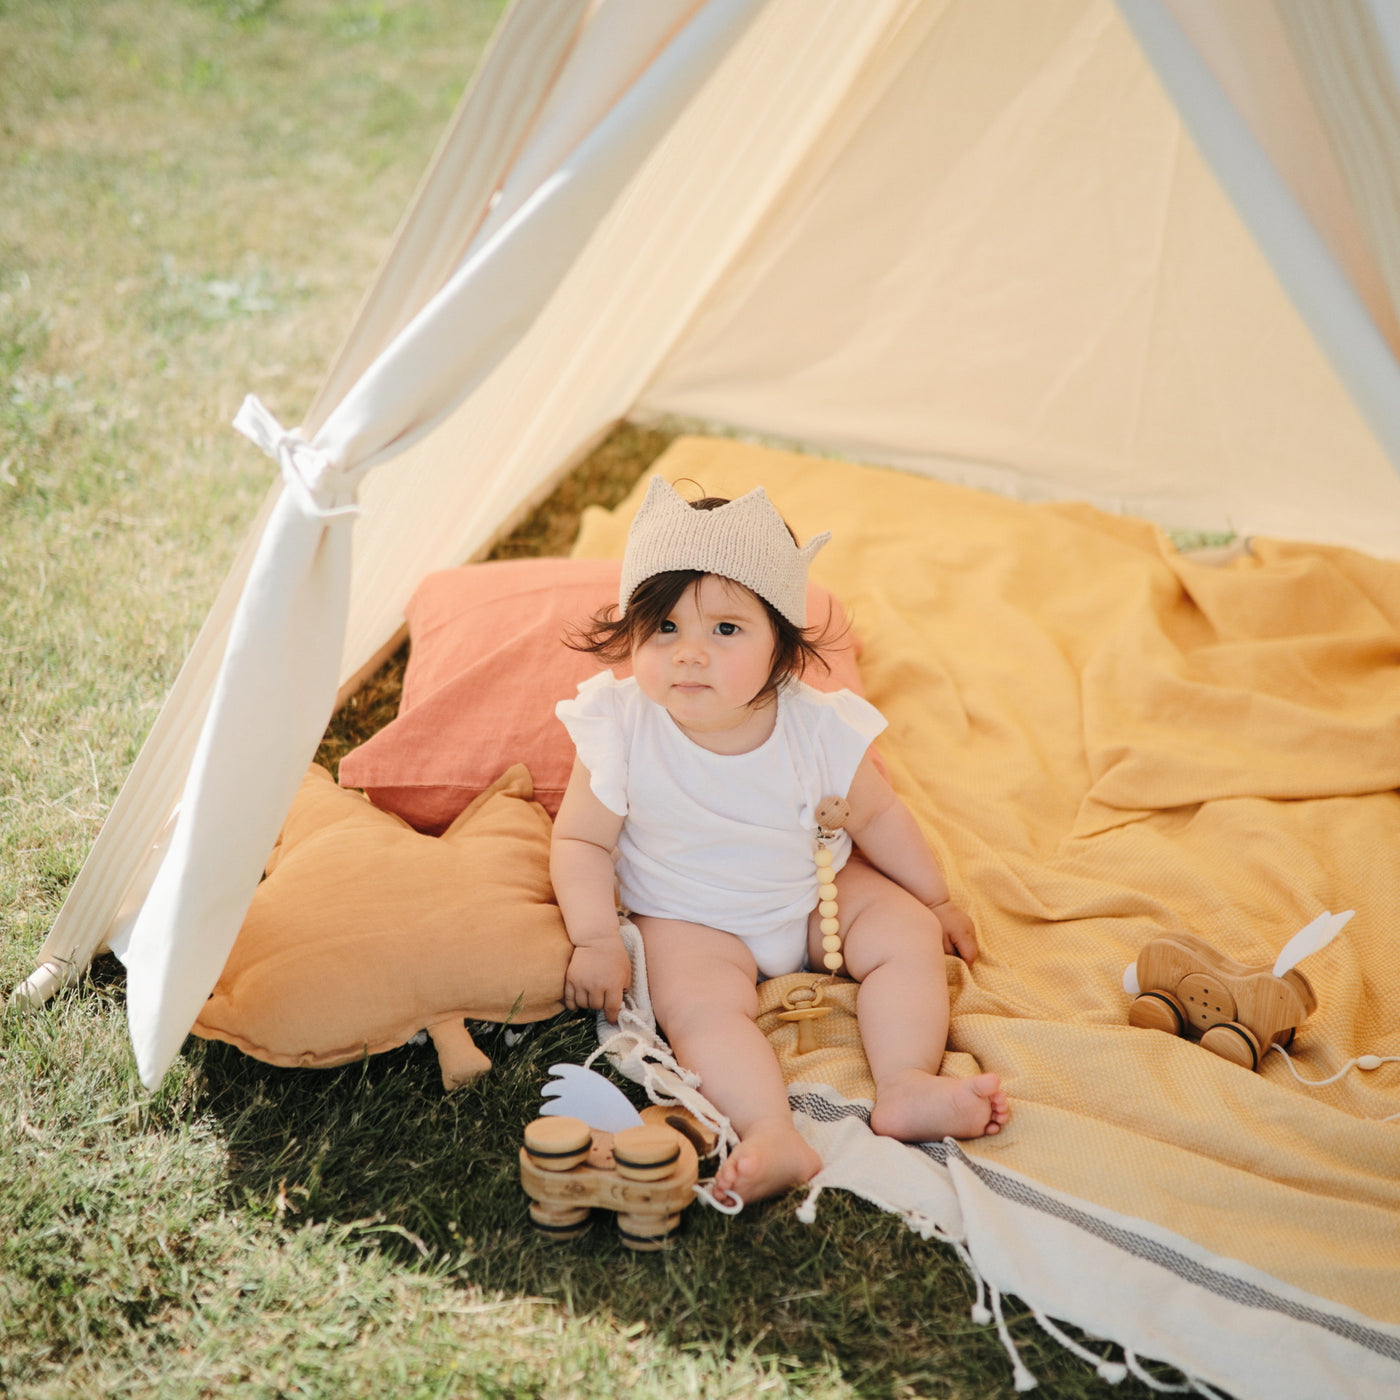 Kinderfeets | Play Tent - Belly Beyond 